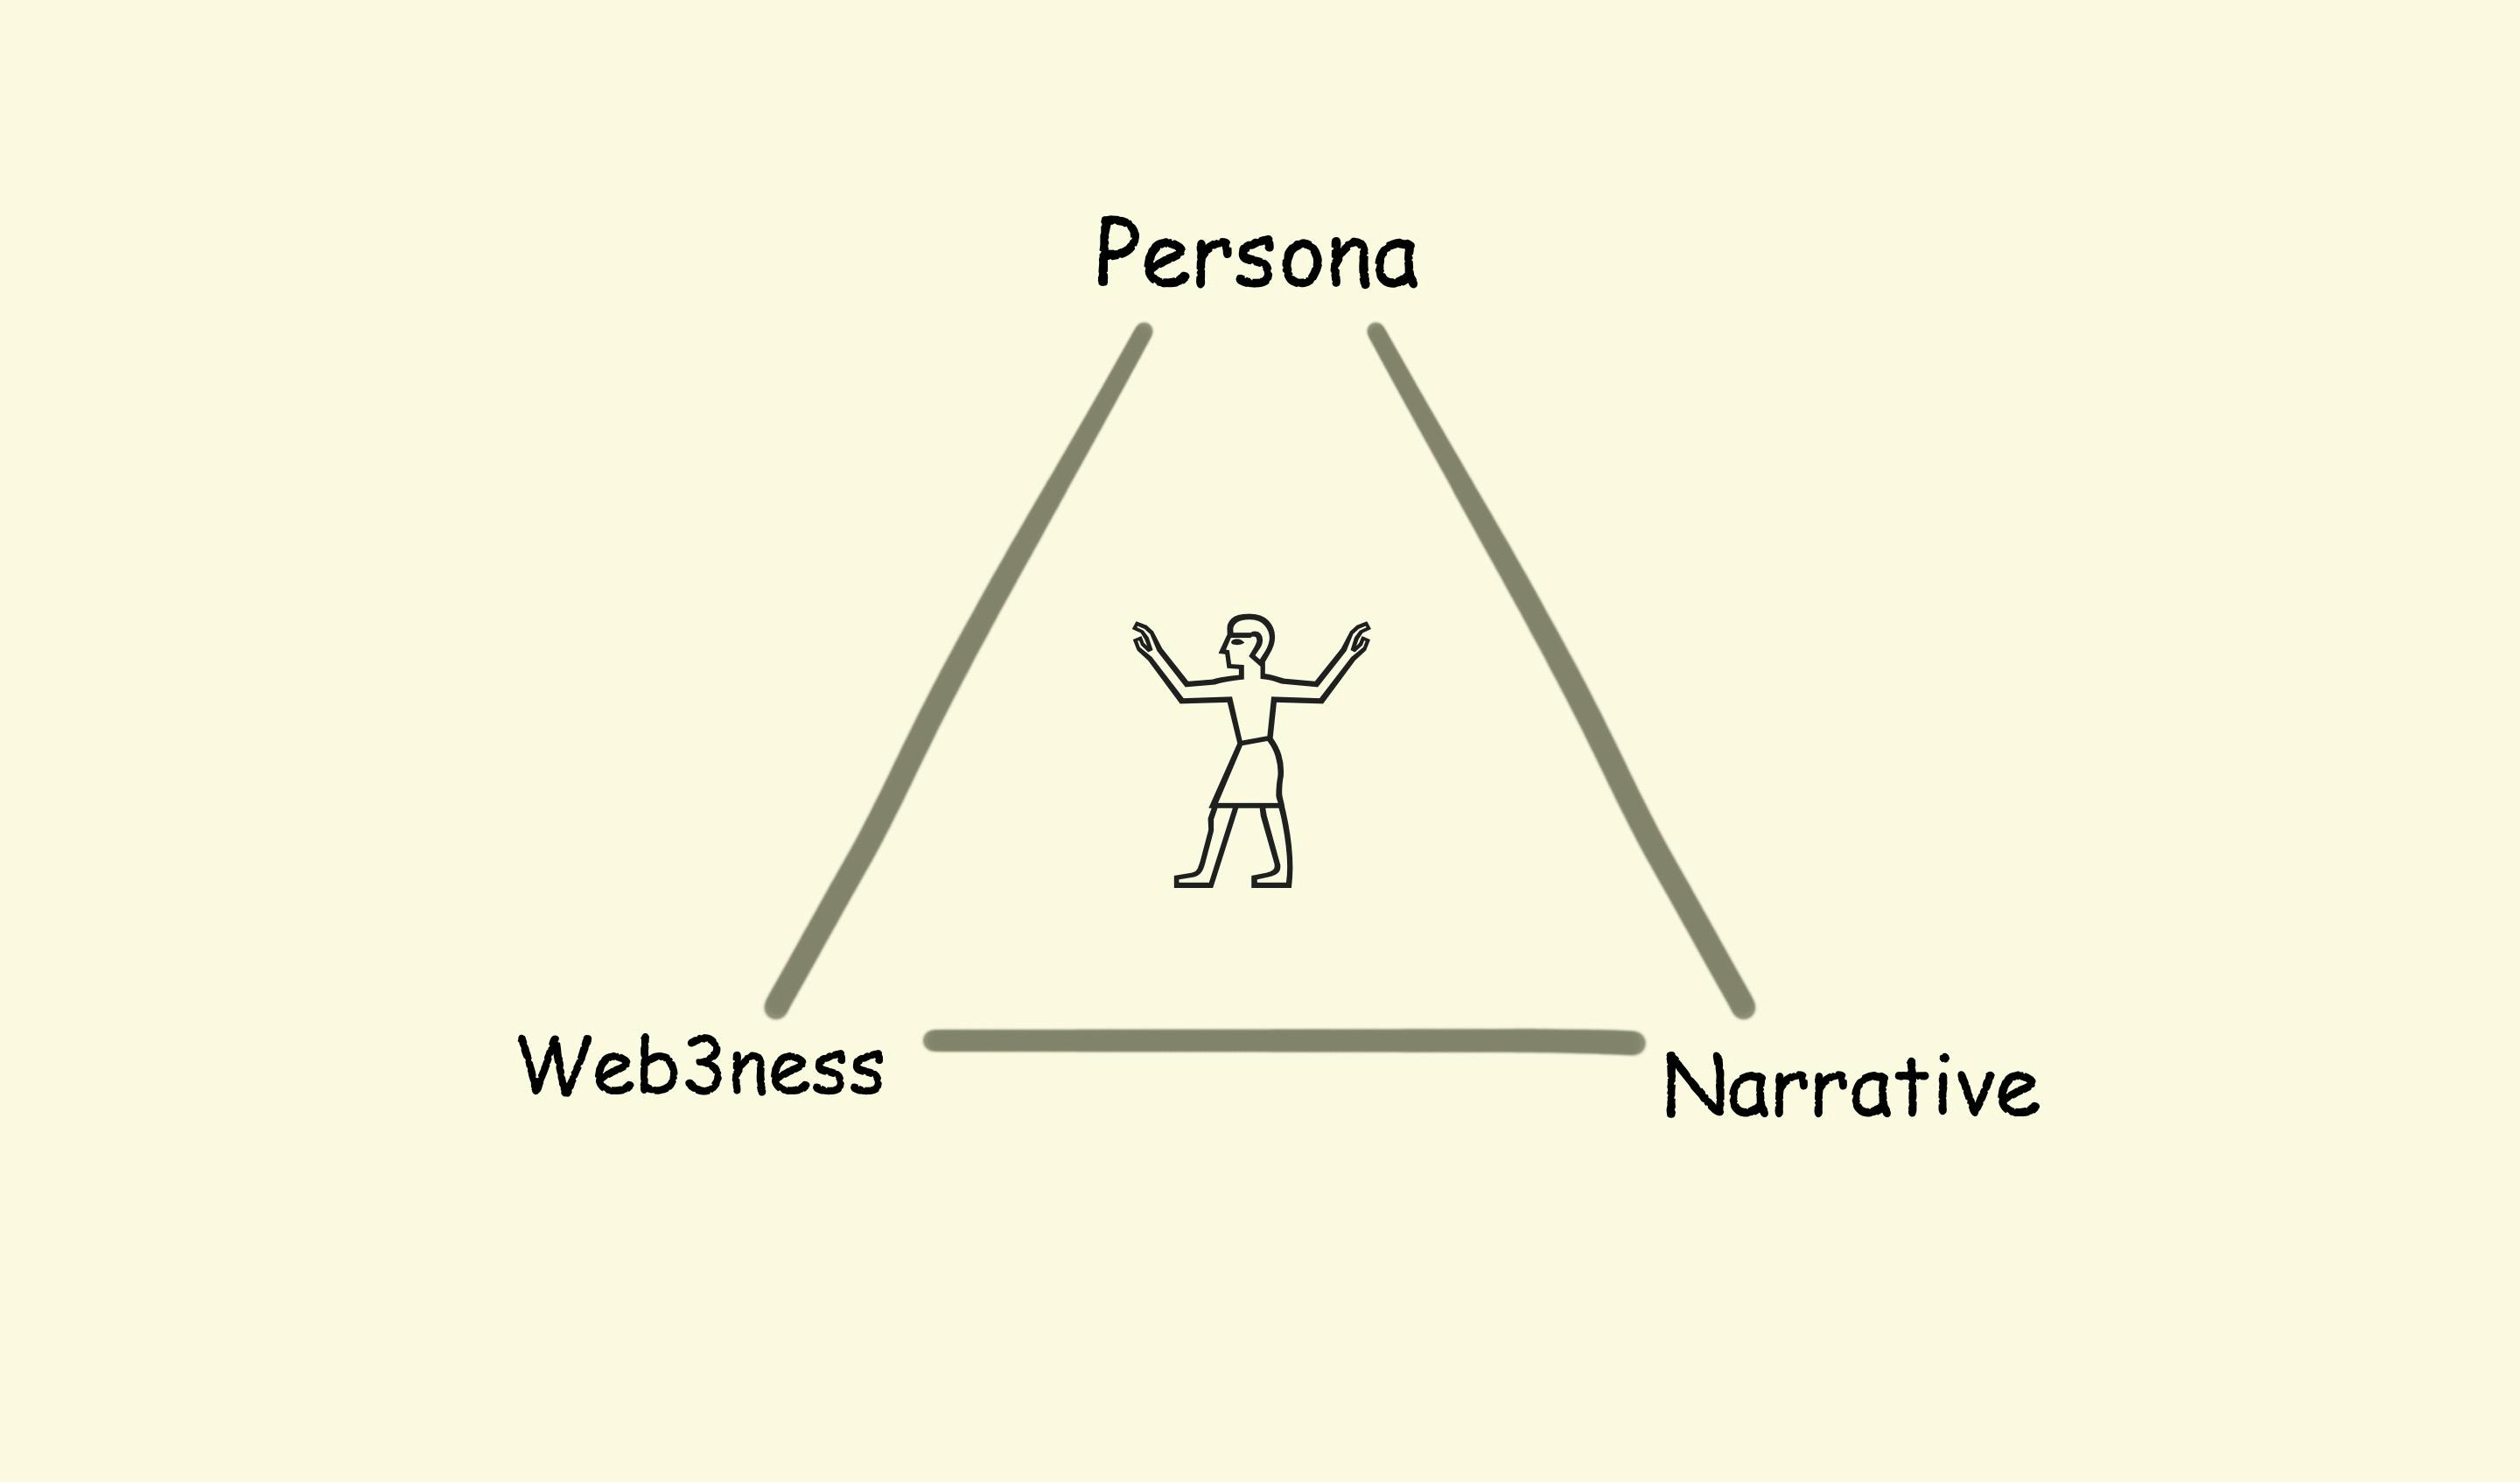 The web3 social project triad of user persona, decentralization and narrative.